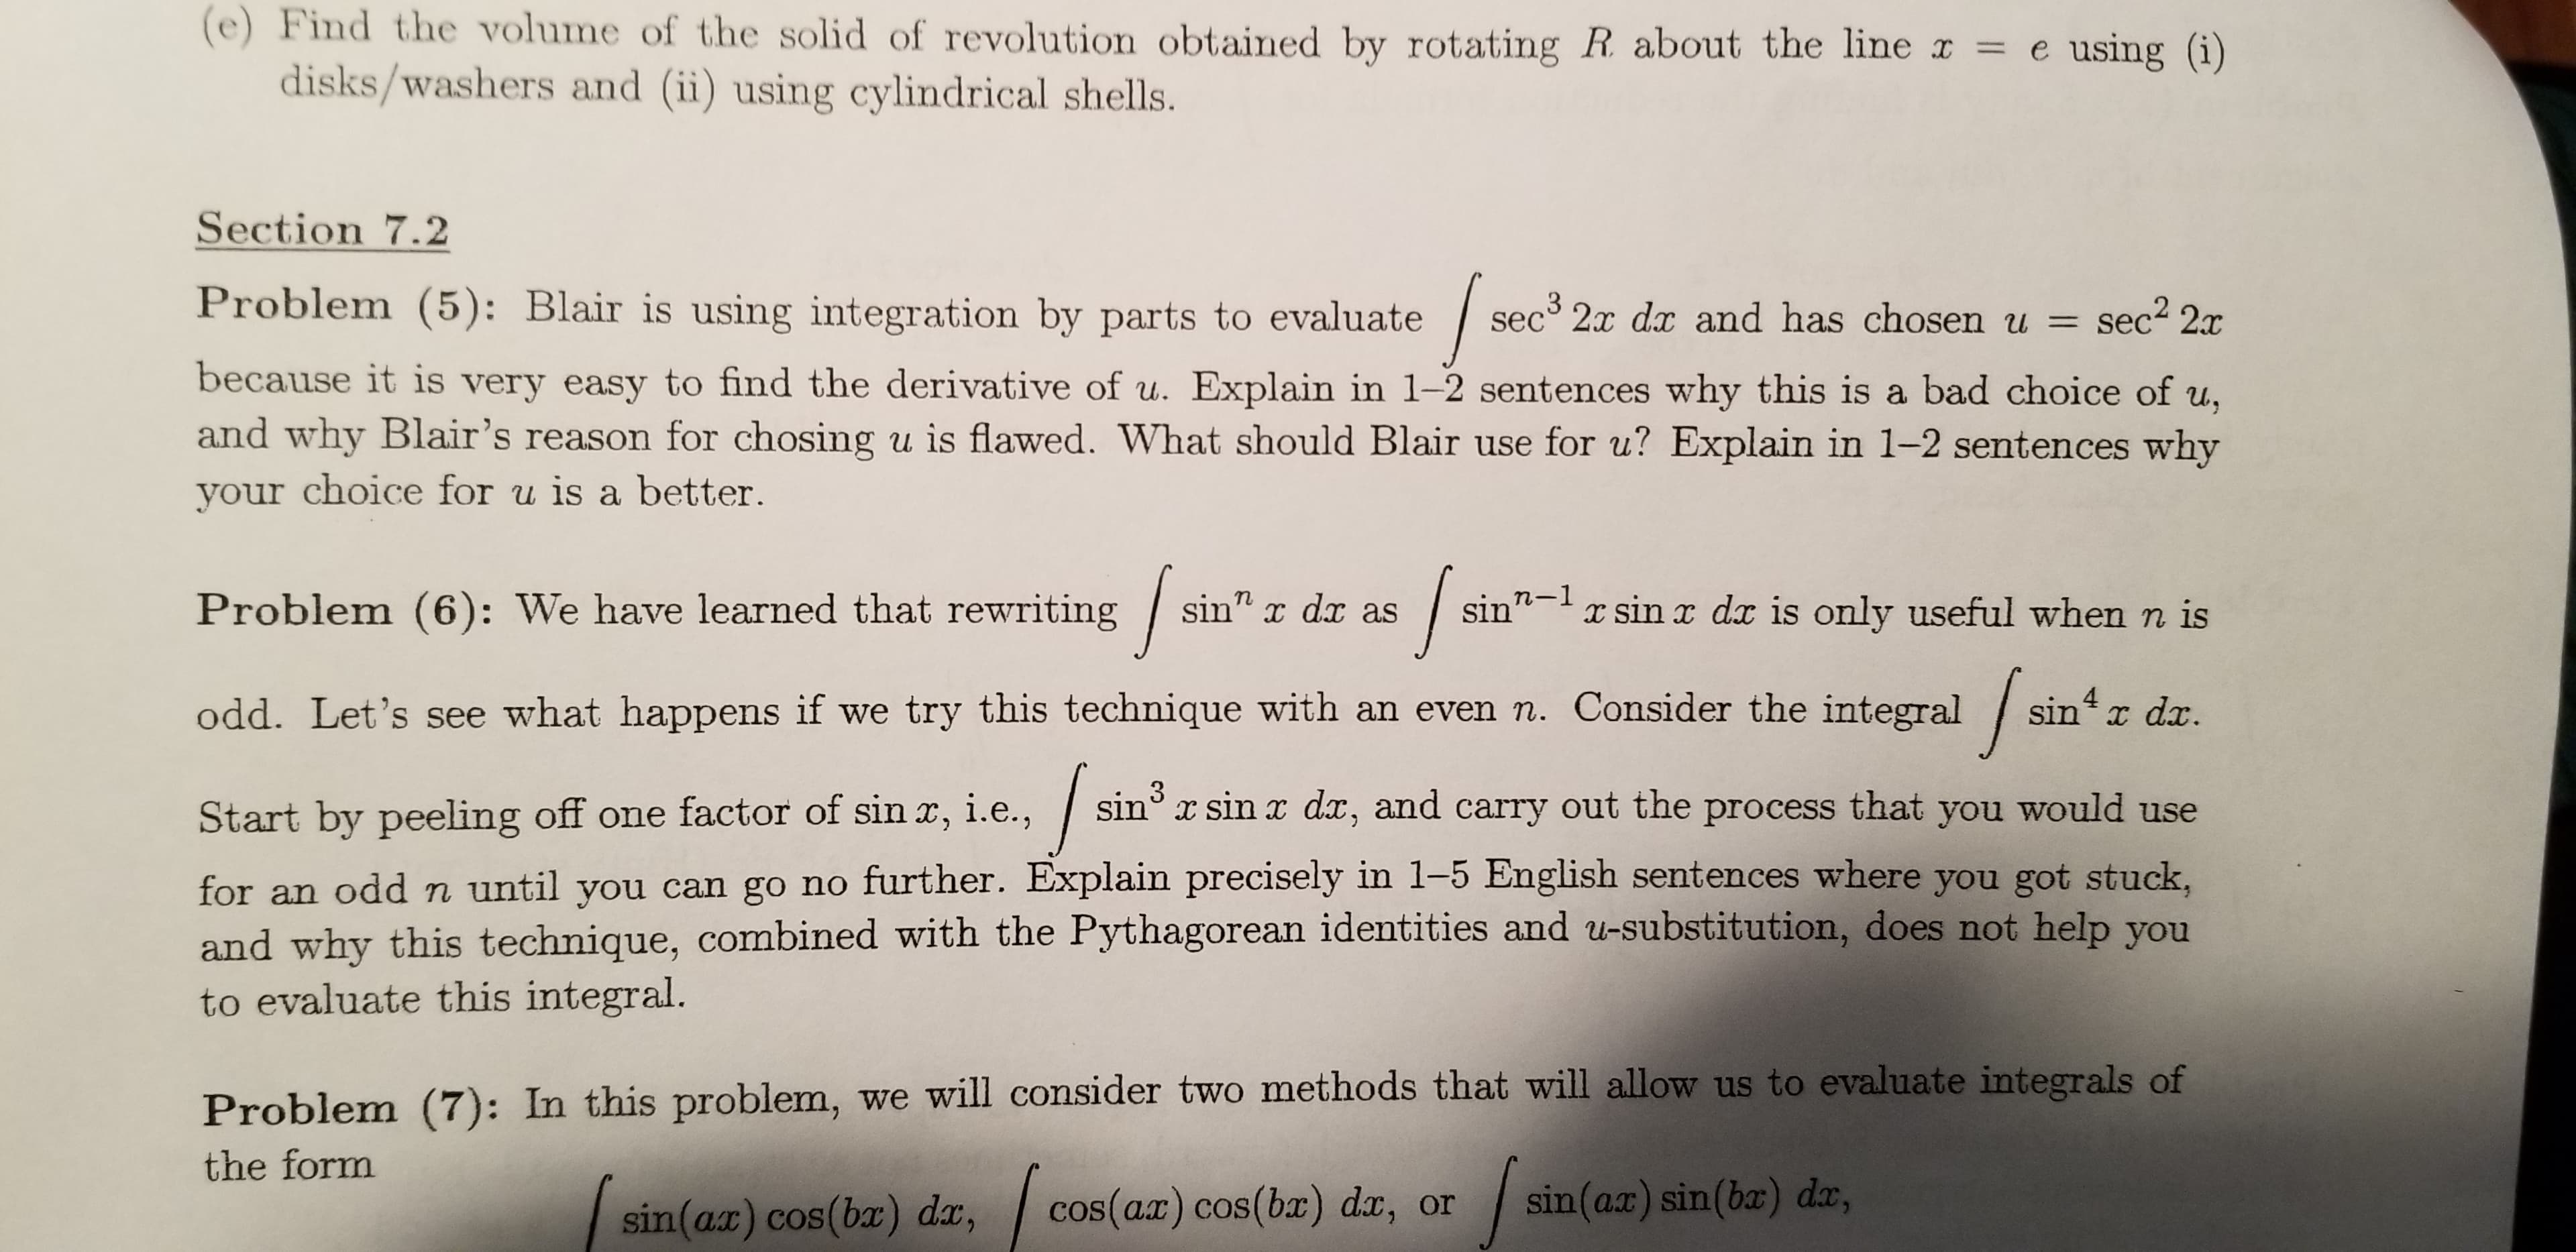 (e) Find the volume of the solid of revolution obtained by rotating R about the line x
disks/washers and (ii) using cylindrical shells.
e using (i)
Section 7.2
Problem (5): Blair is using integration by parts to evaluate
sec³
3 2x dx and has chosen u = sec2 2x
%3D
because it is very easy to find the derivative of u. Explain in 1-2 sentences why this is a bad choice of u,
and why Blair's reason for chosing u is flawed. What should Blair use for u? Explain in 1-2 sentences why
your choice for u is a better.
sin" x dx as
sin"- x sin x dx is only useful when n is
Problem (6): We have learned that rewriting
sin'
odd. Let's see what happens if we try this technique with an even n. Consider the integral
sin
“ x dx.
3
sin x sin x dx, and carry out the process that you would use
Start by peeling off one factor of sin x, i.e.,
for an odd n until you can go no further. Explain precisely in 1-5 English sentences where you got stuck,
and why this technique, combined with the Pythagorean identities and u-substitution, does not help you
to evaluate this integral.
Problem (7): In this problem, we will consider two methods that will allow us to evaluate integrals of
the form
| sin(ax) sin(bæ) dr,
cos(ar) cos(bx) dx, or
sin(ar) cos(bx) dr,
COS
